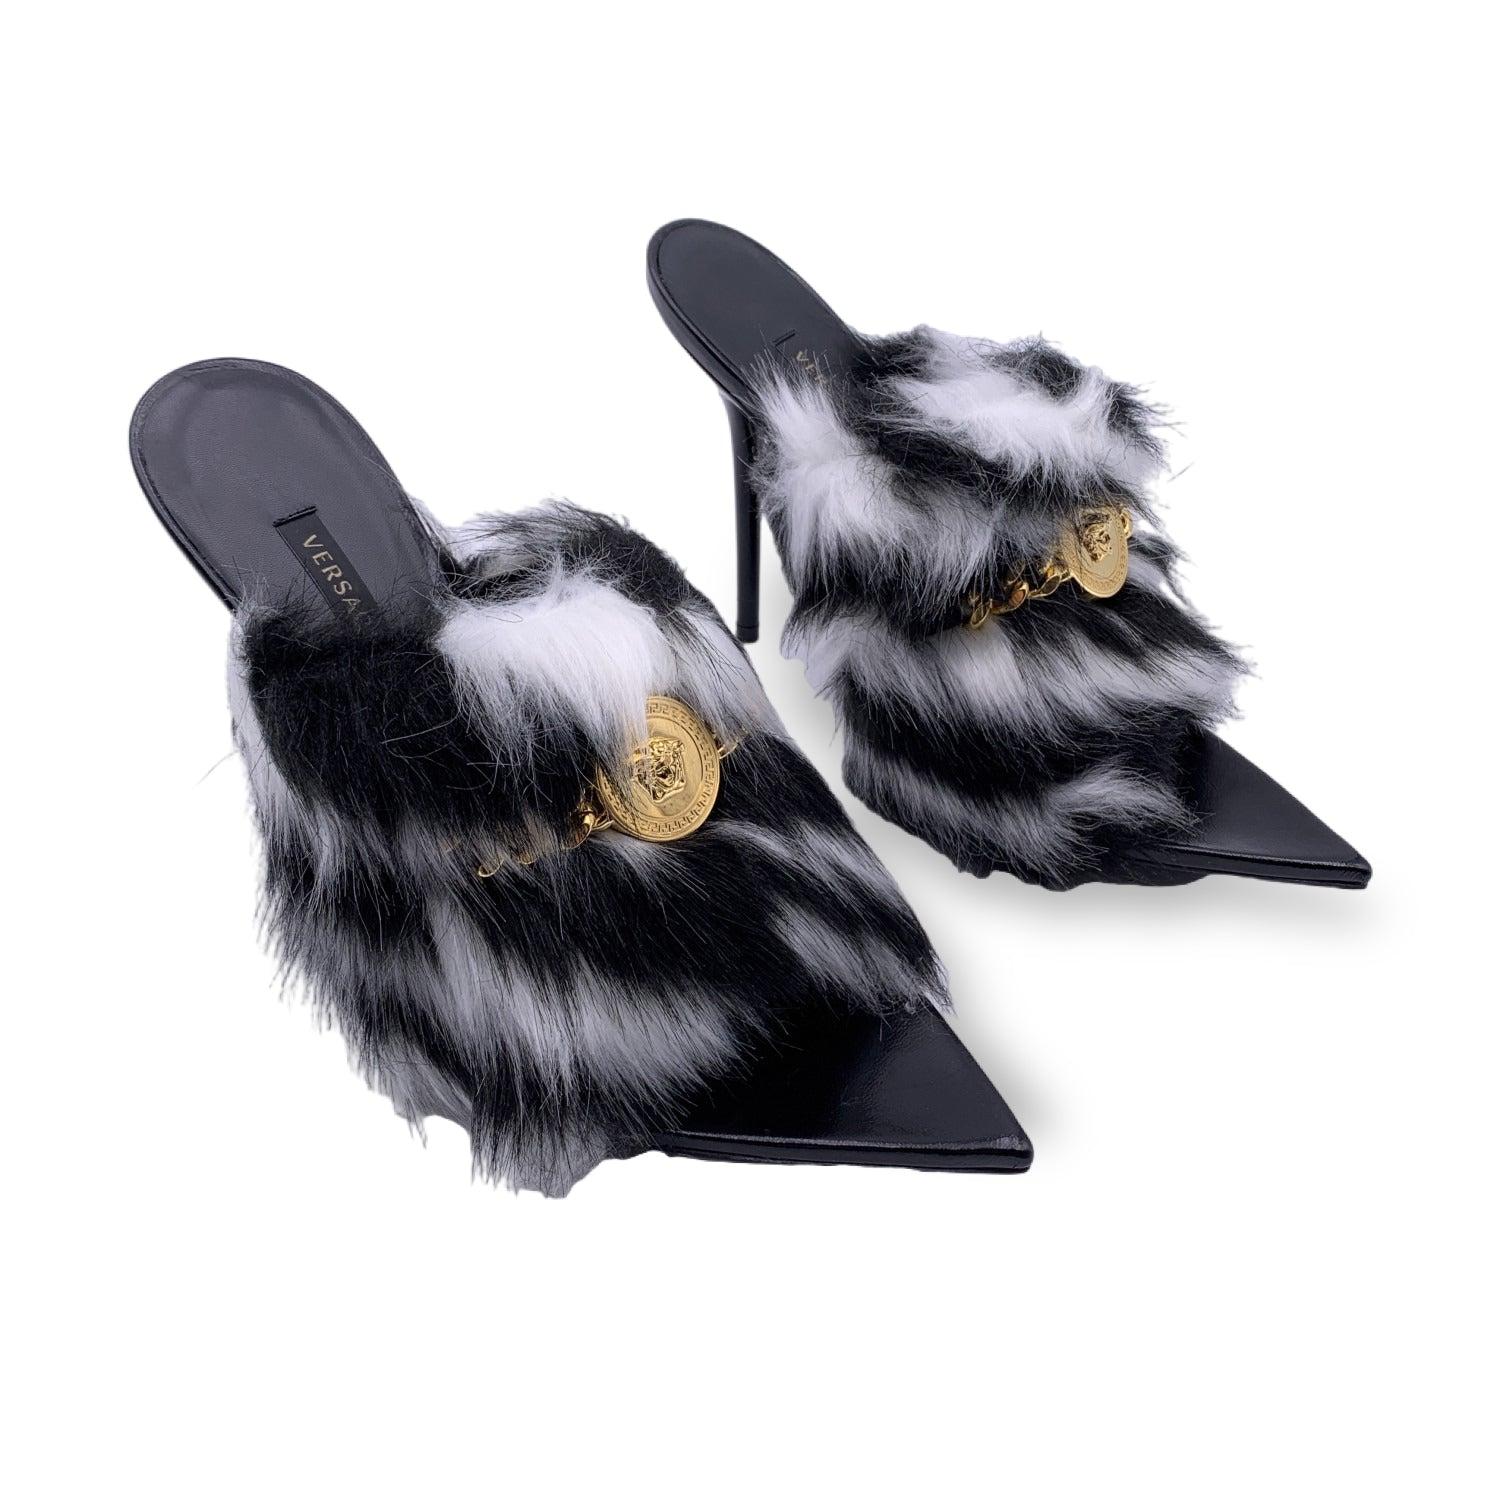 Versace heeled Sandals Mules. Black leather with zebra-effect faux fur. Golden Medusa and chain detailing on the upper. Pointed toe. Heels height: 4.25 inches - 11 cm. Size: EU 38.5 (The size shown for this item is the size indicated by the designer